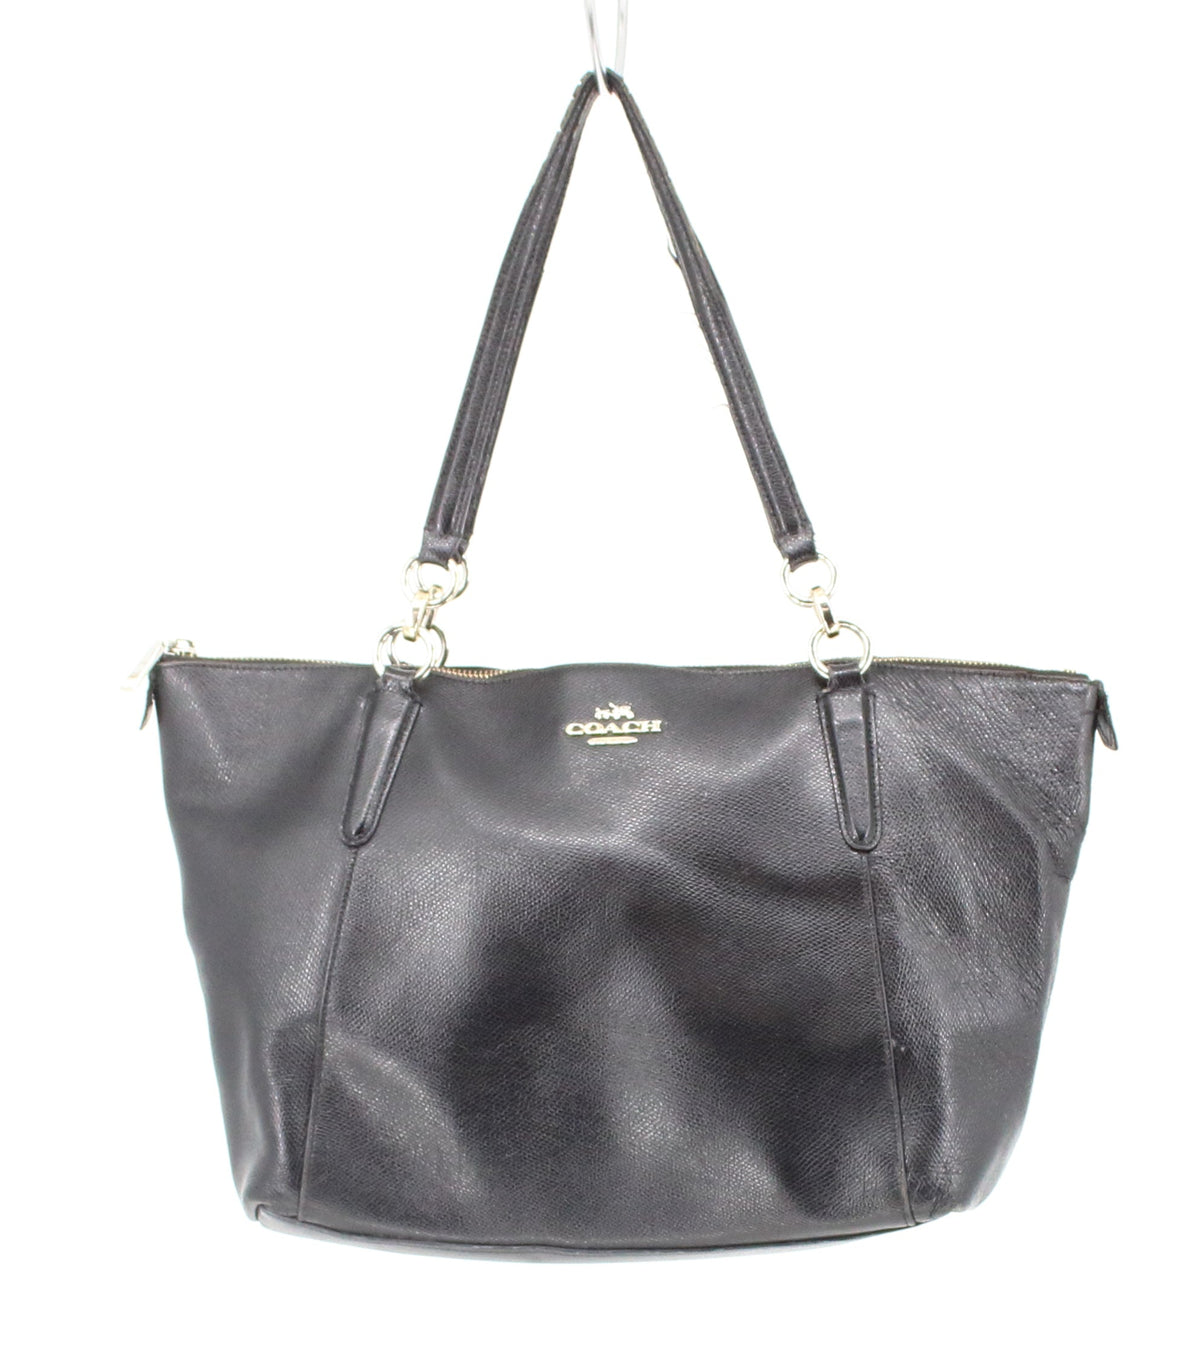 Coach Black Leather Purse With Zip Up Closure